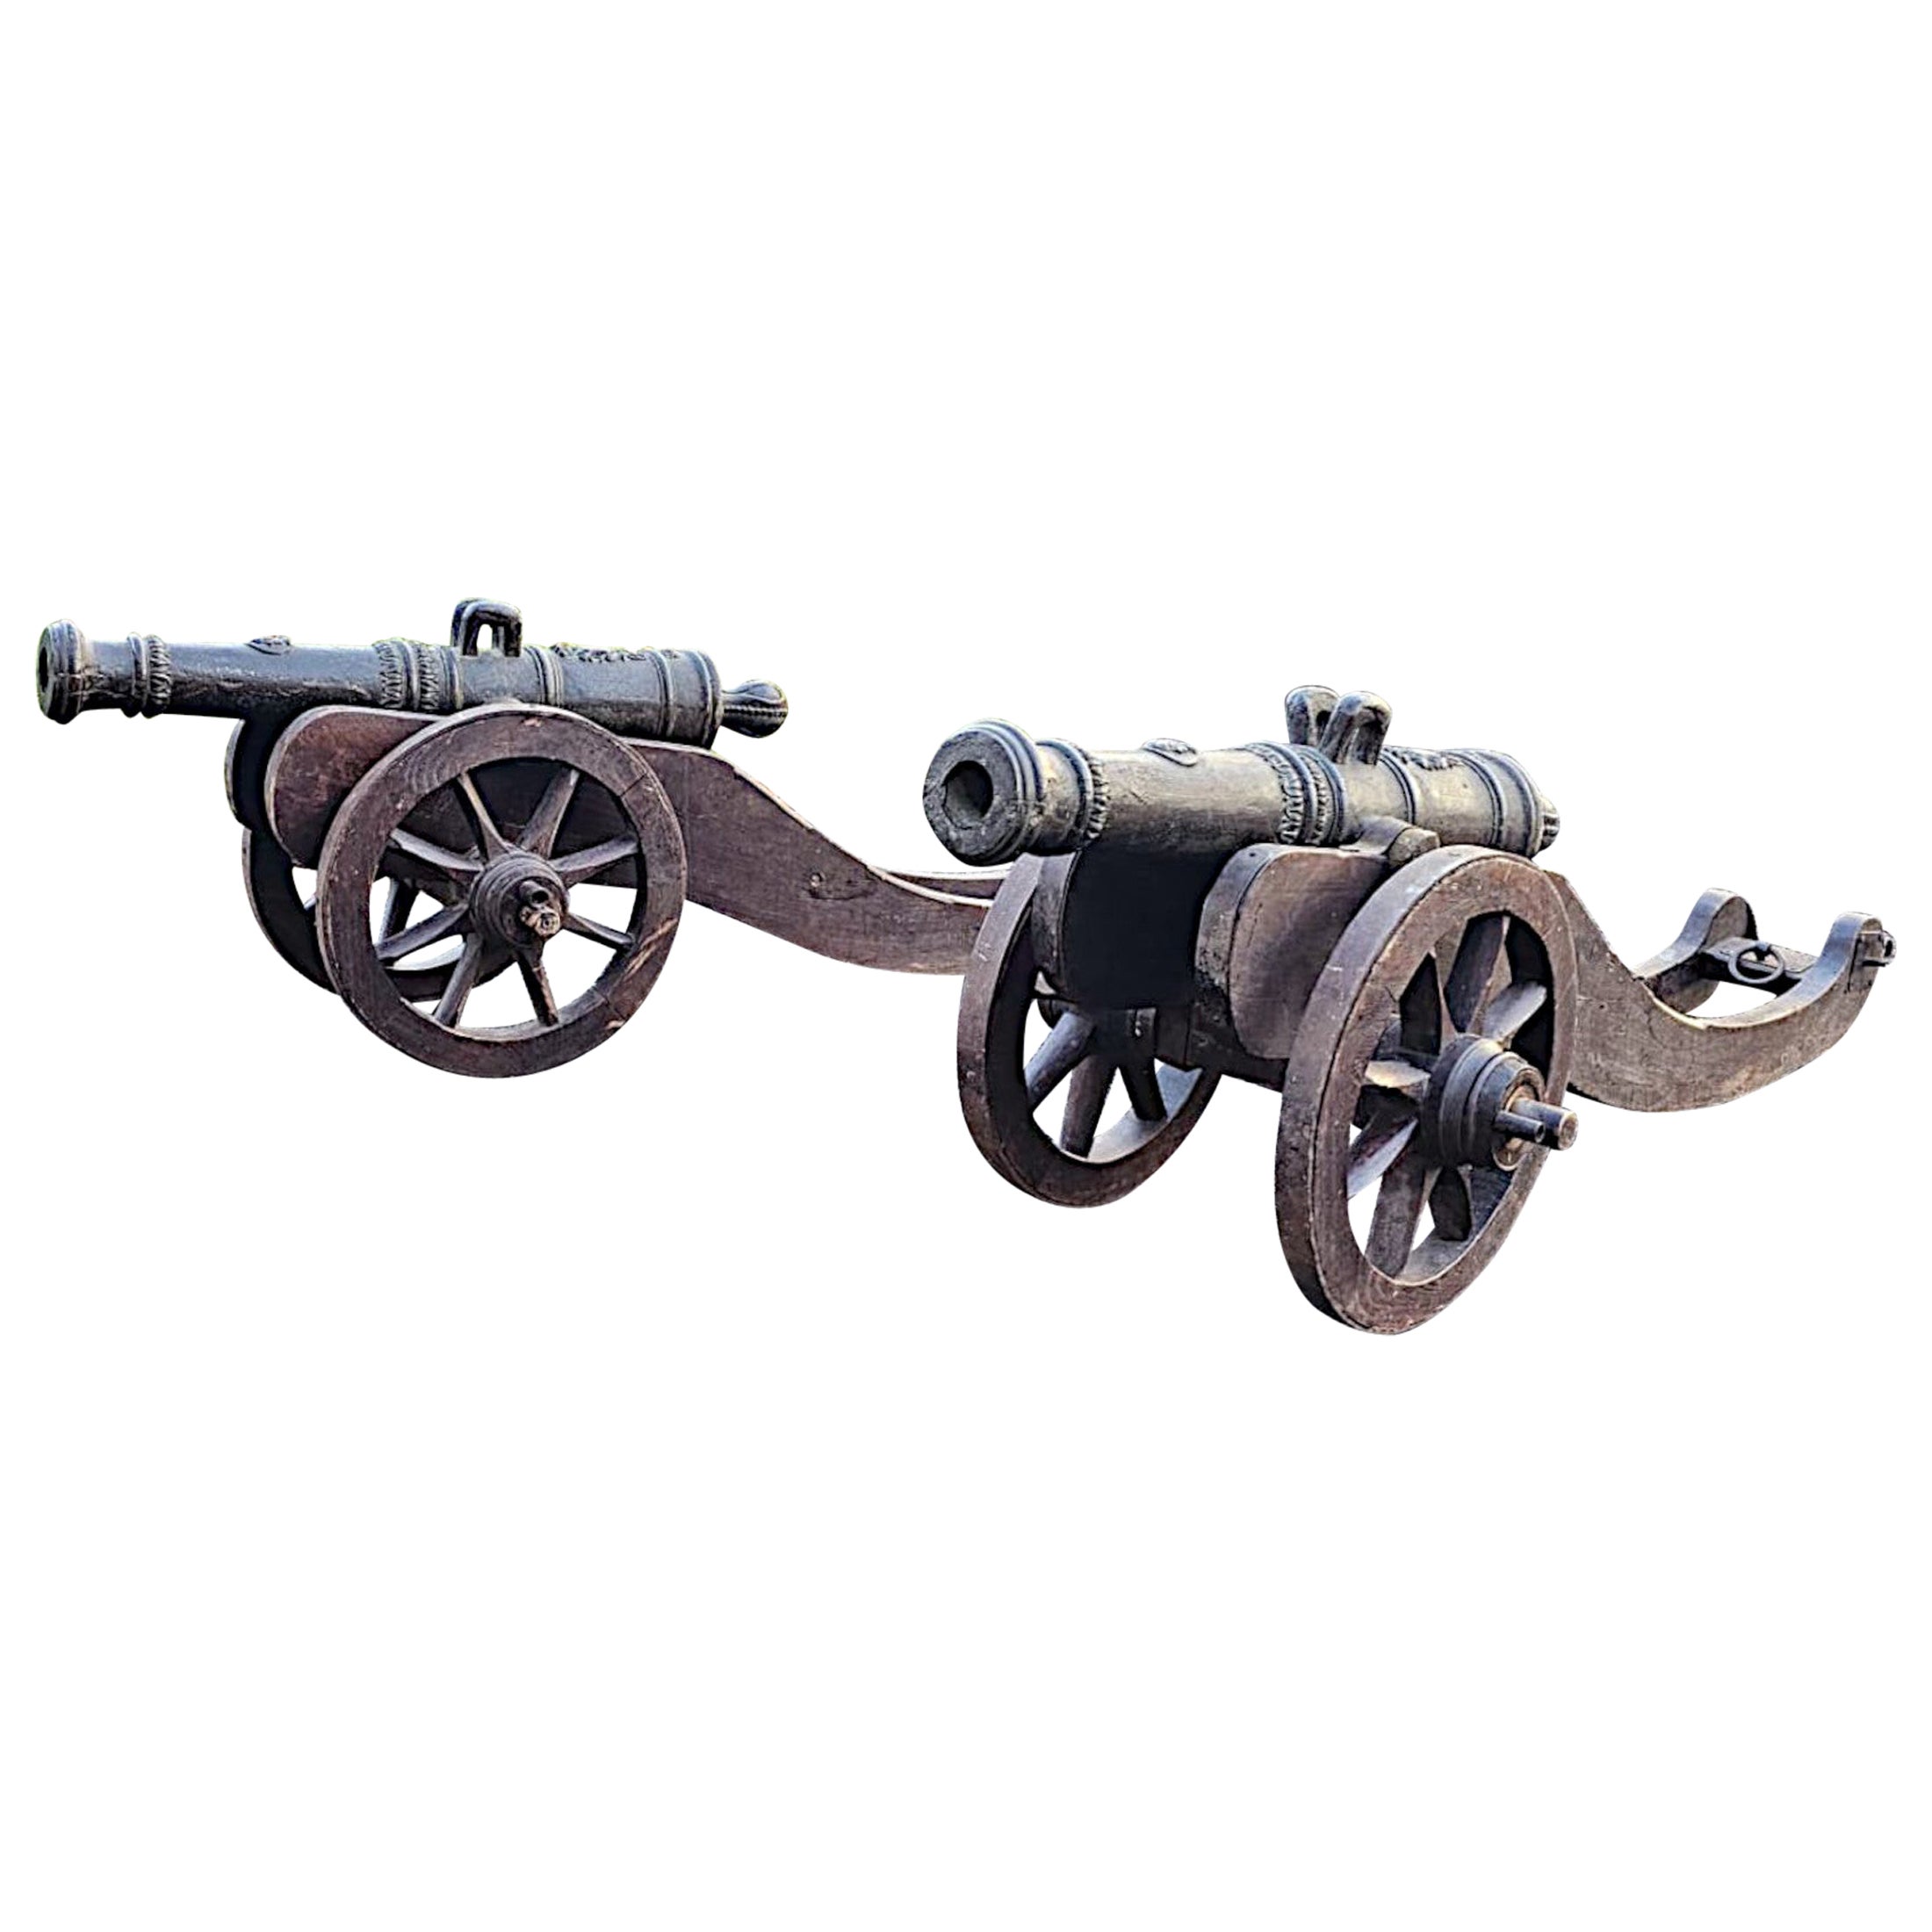 A Very Rare Pair of 19th Century Bronze Barrelled Signal Cannons on Timber Base For Sale